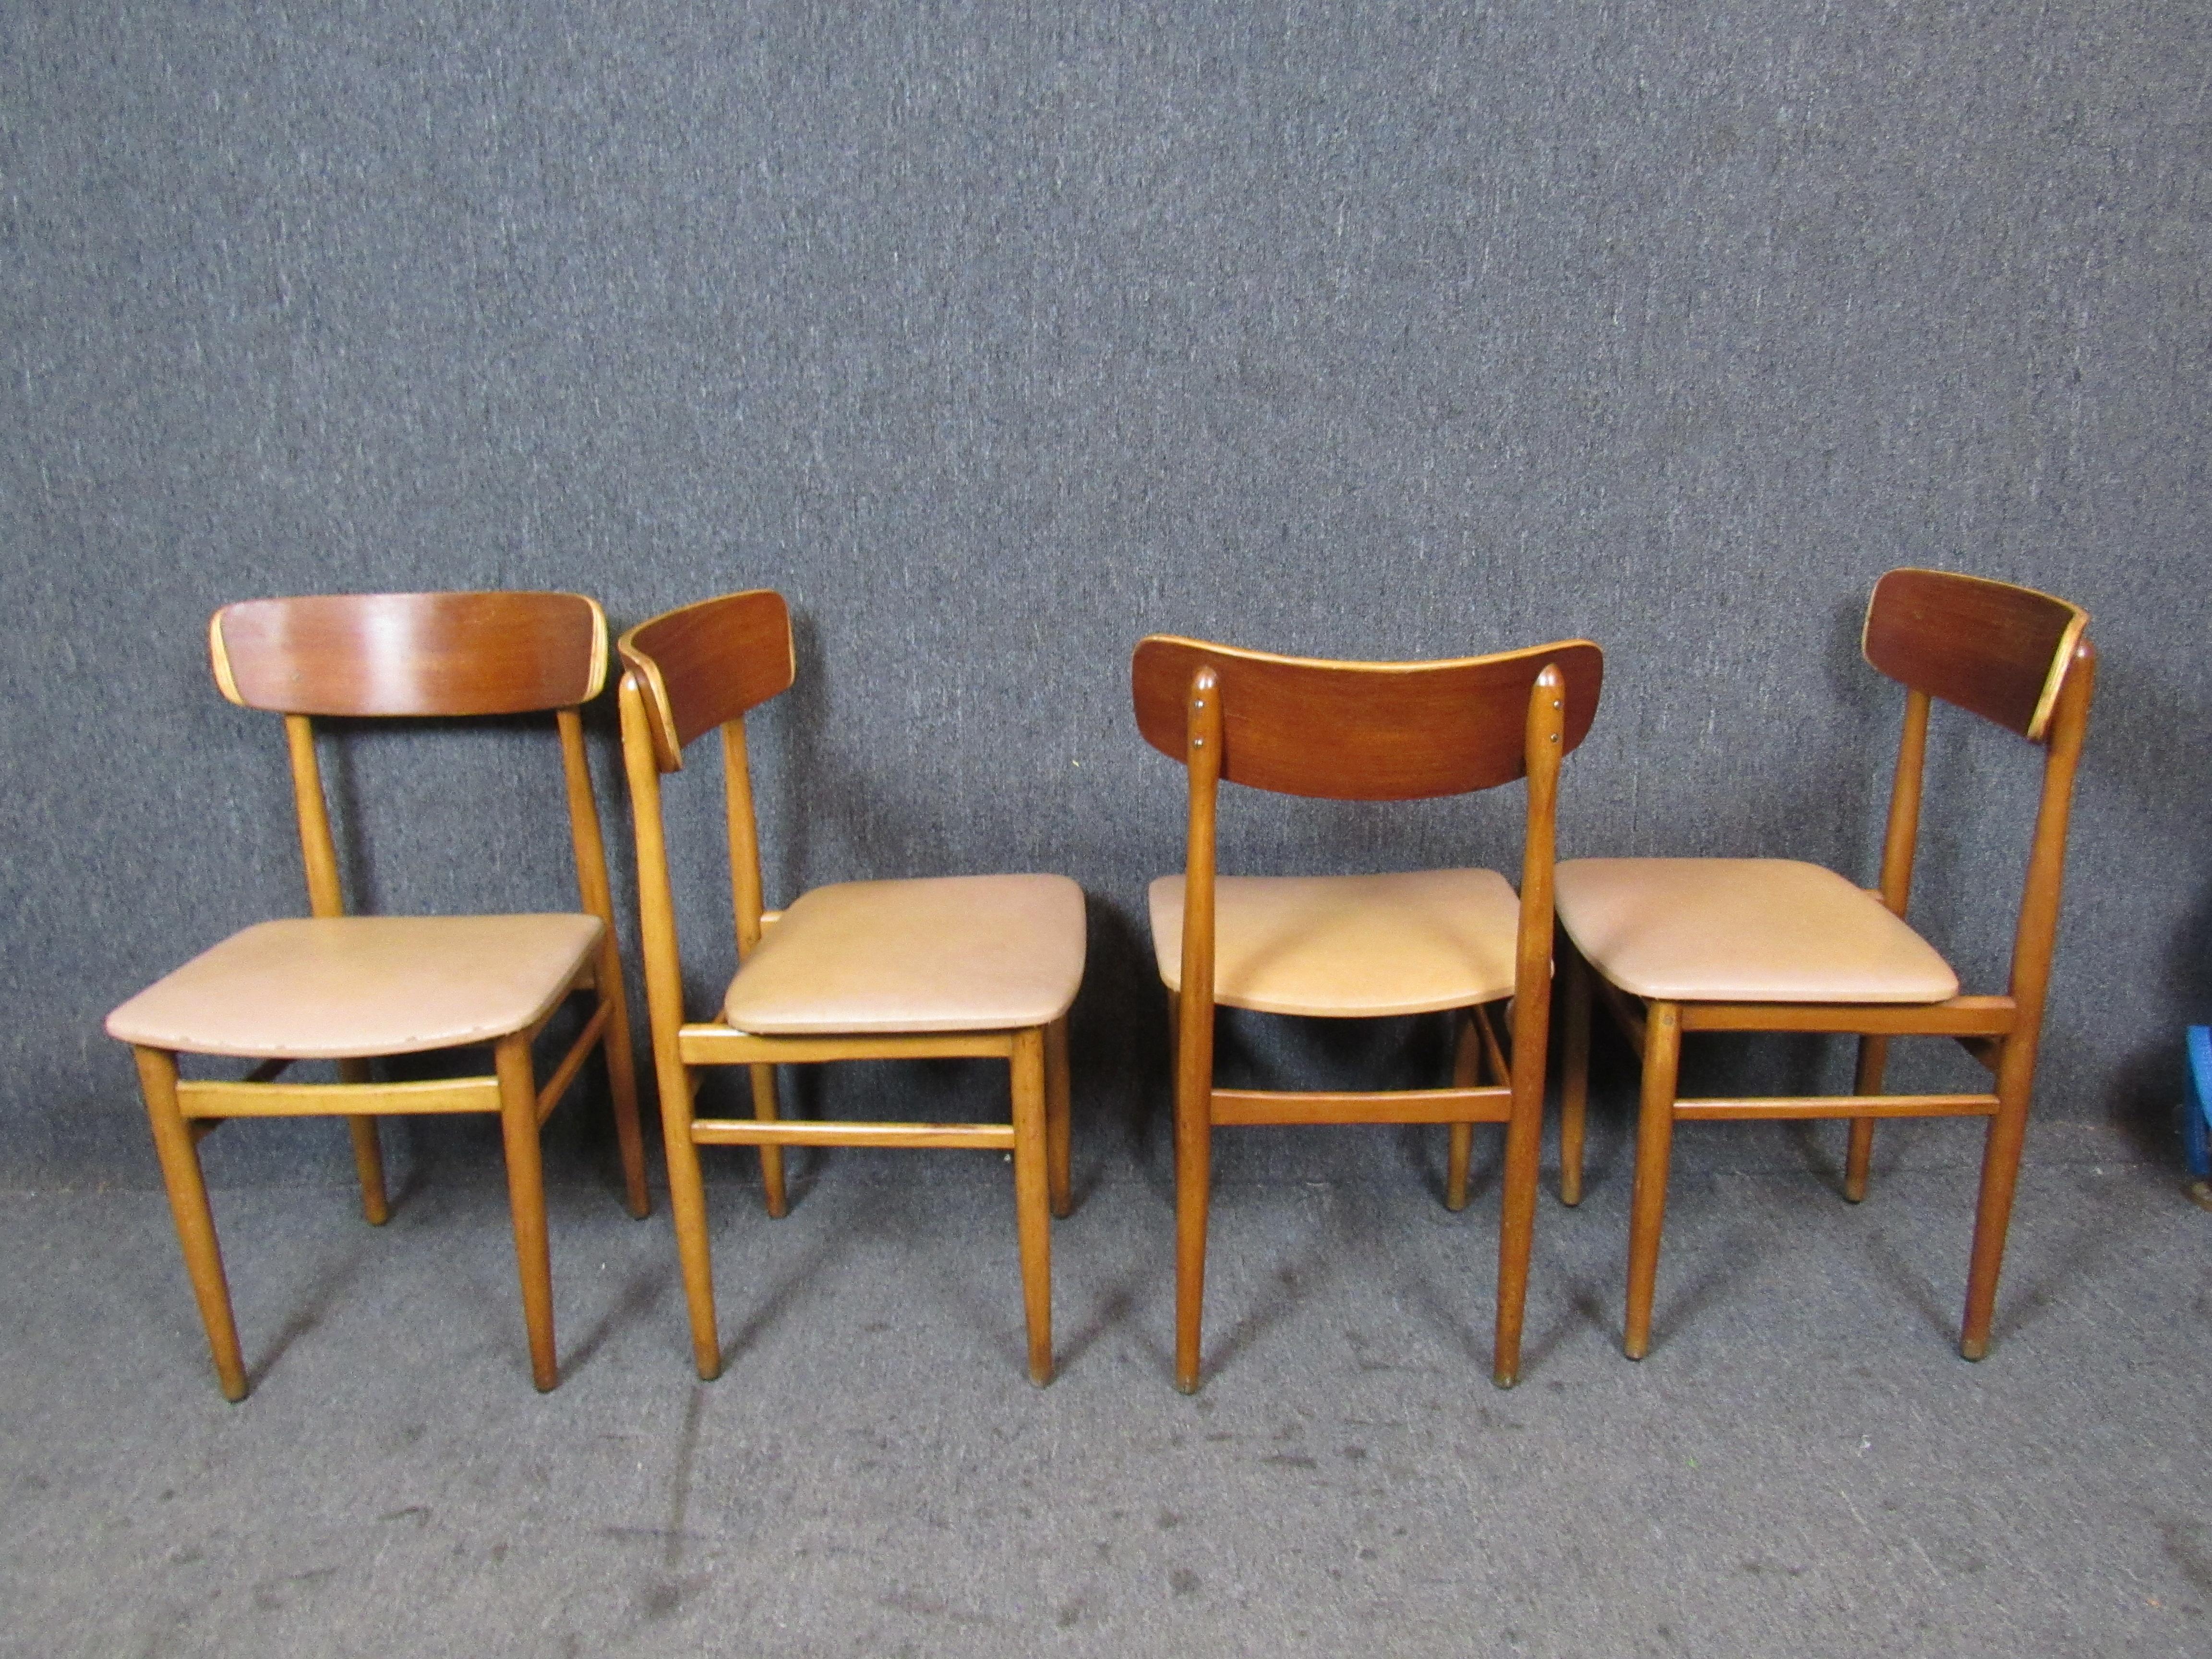 Midcentury Danish Bent Plywood Dining Chairs In Good Condition For Sale In Brooklyn, NY